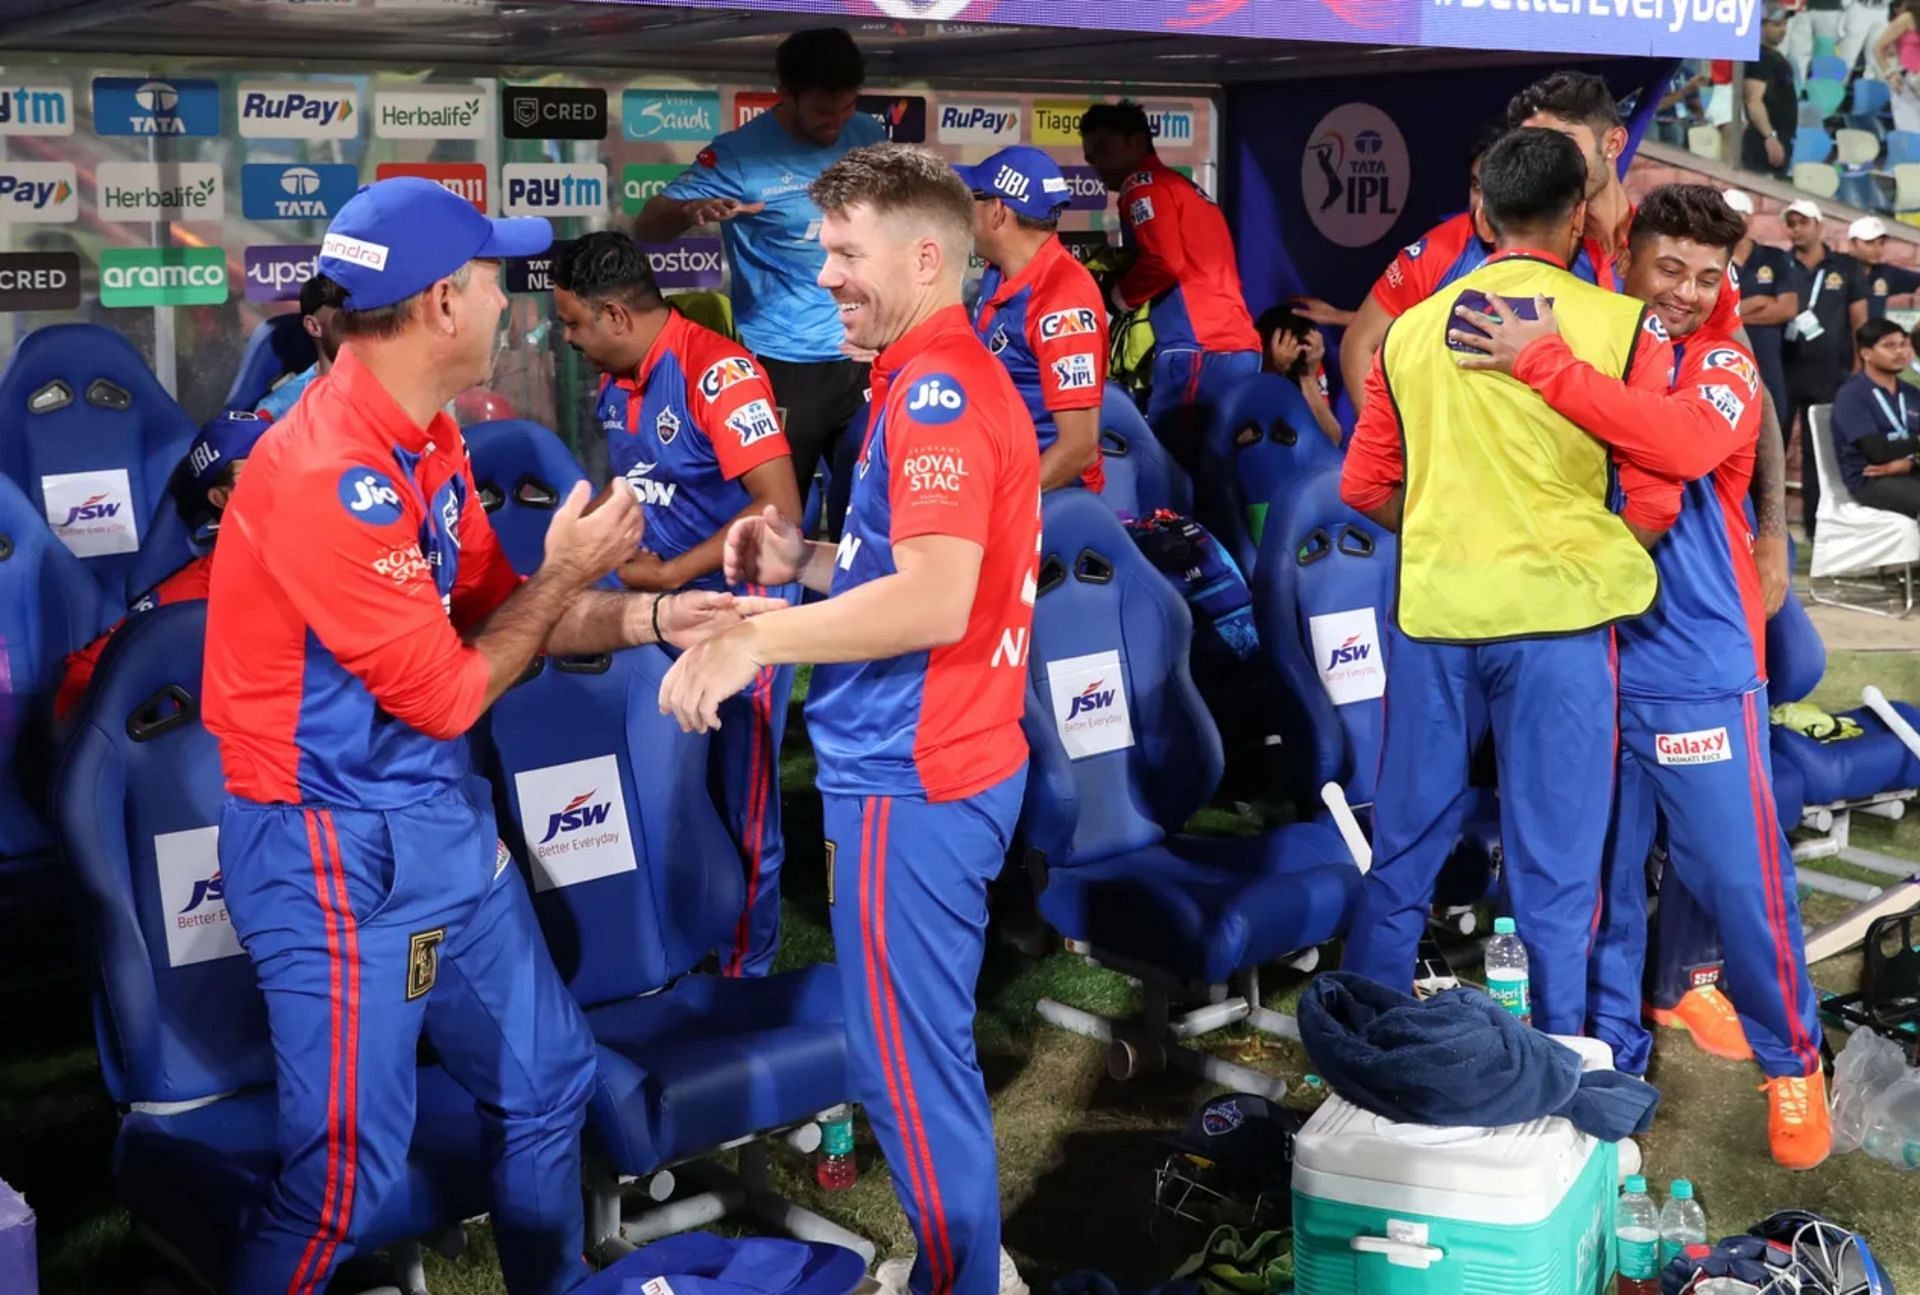 DC bagged their first win of IPL 2023 on Thursday vs KKR.